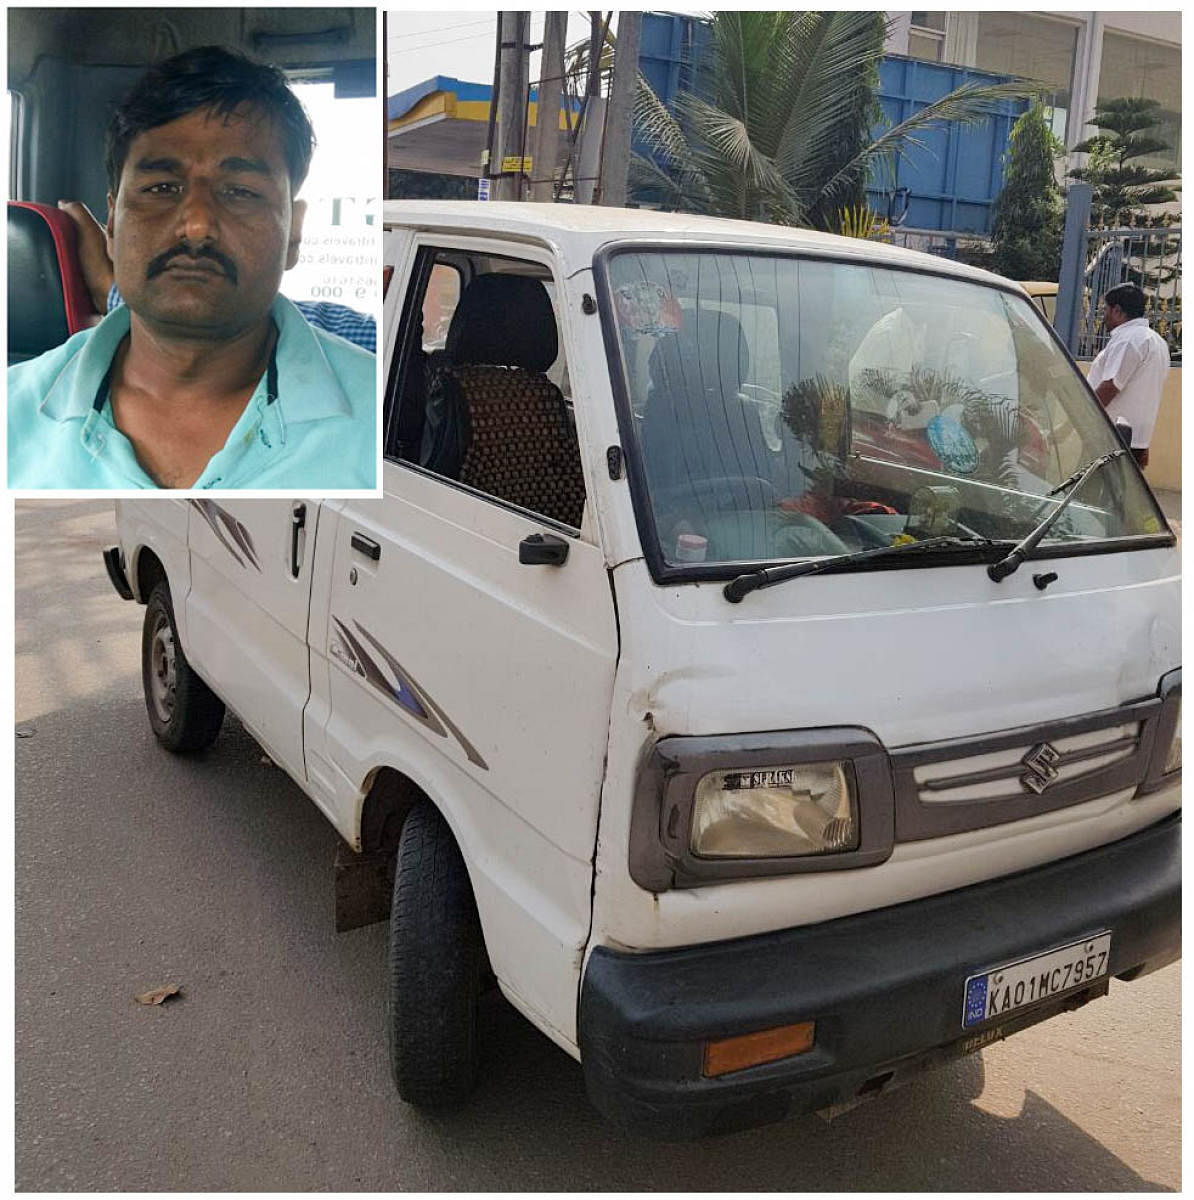 The HSR Layout police arrested a chain snatcher, Soma alias Somashekhar, a resident of Anekal who was roaming in his Maruthi, in Bengaluru. Dh photo